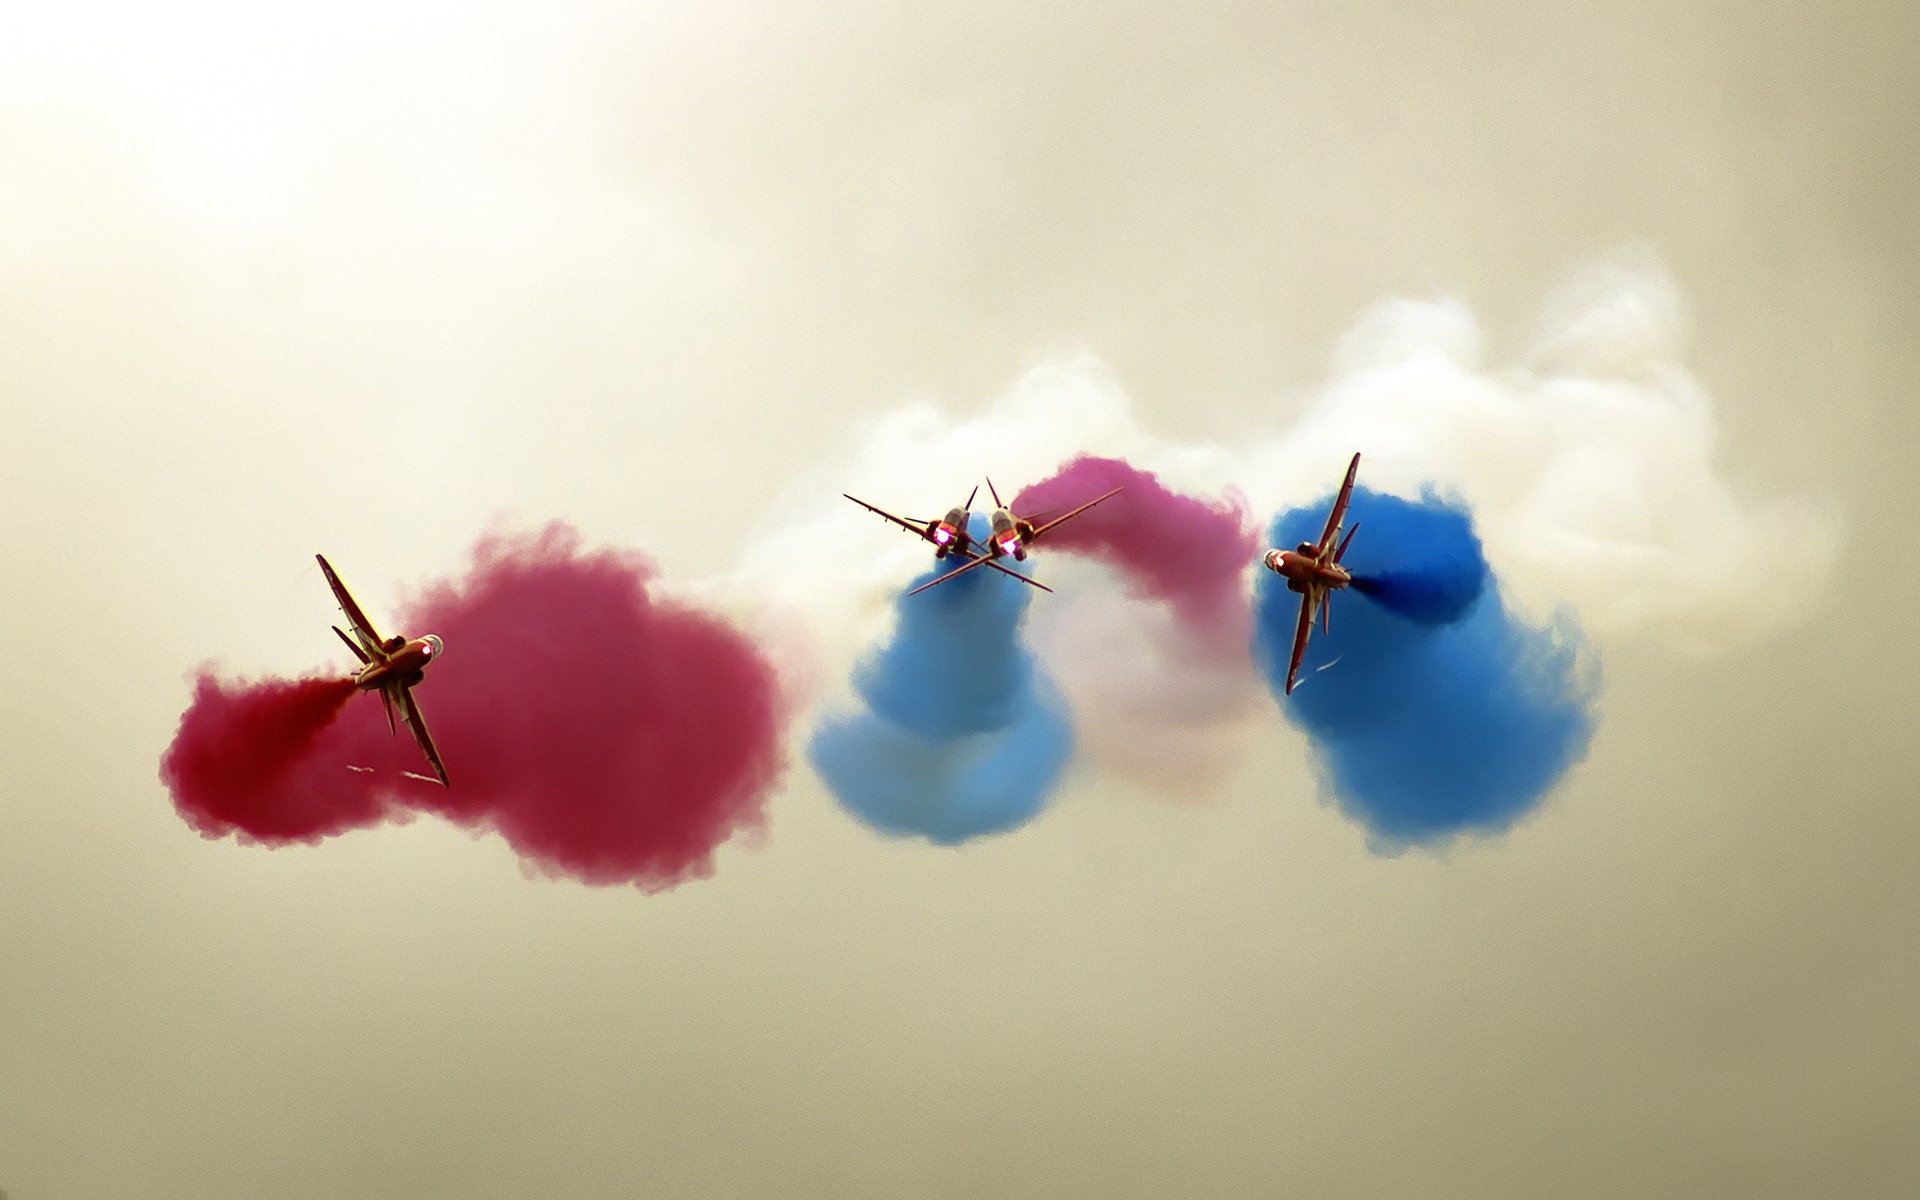 General 1920x1200 contrails airshows smoke vehicle aircraft red white blue airplane